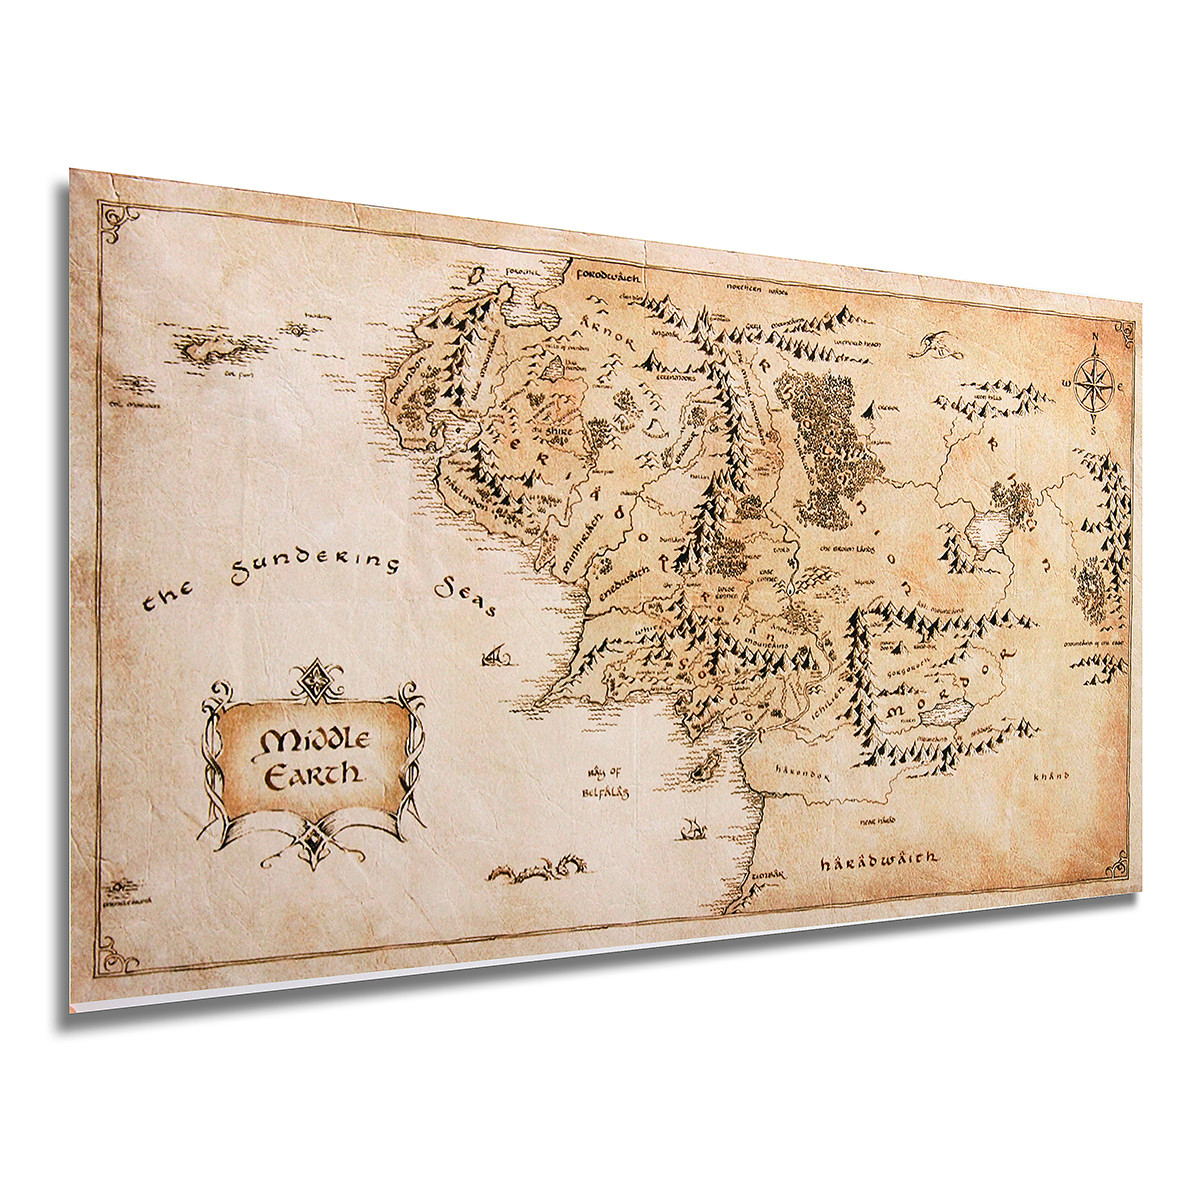 110x60CM-Map-of-Middle-Earth-Lord-of-The-Rings-Silk-Cloth-Poster-Home-Decor-1097036